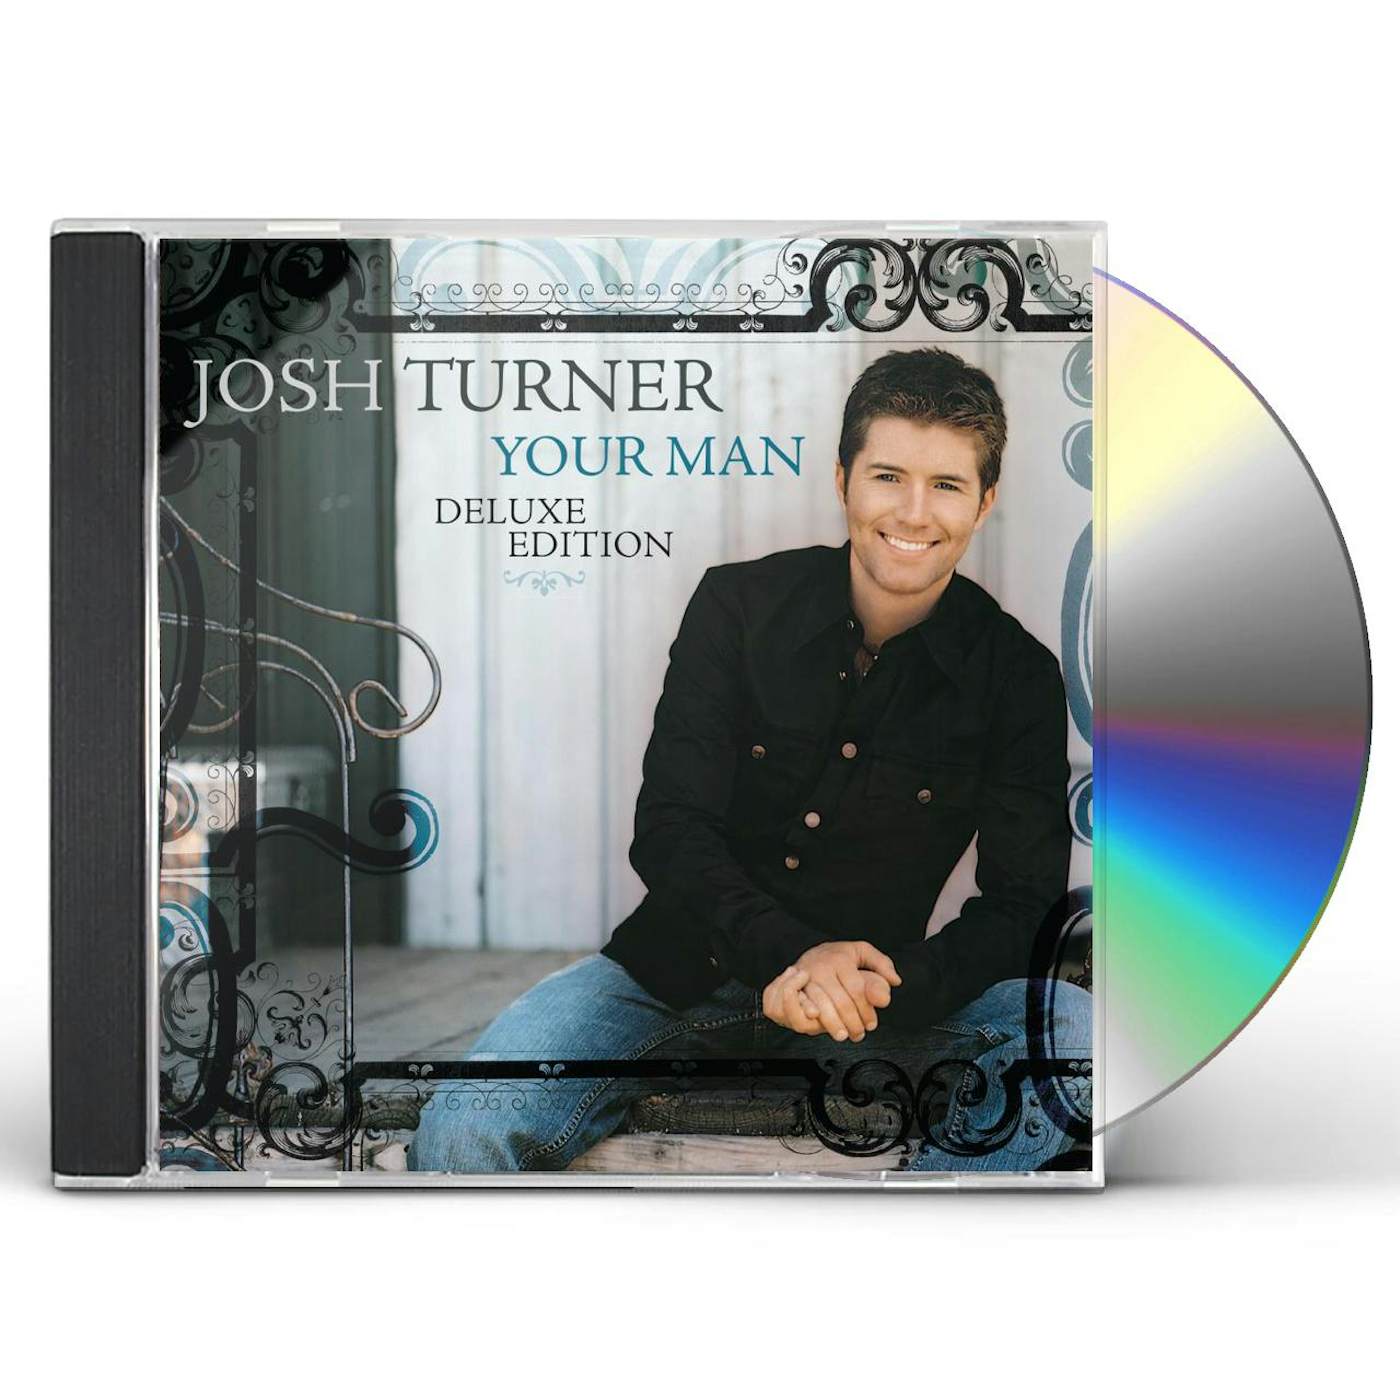 Josh Turner YOUR MAN (15TH ANNIVERSARY DELUXE EDITION) CD